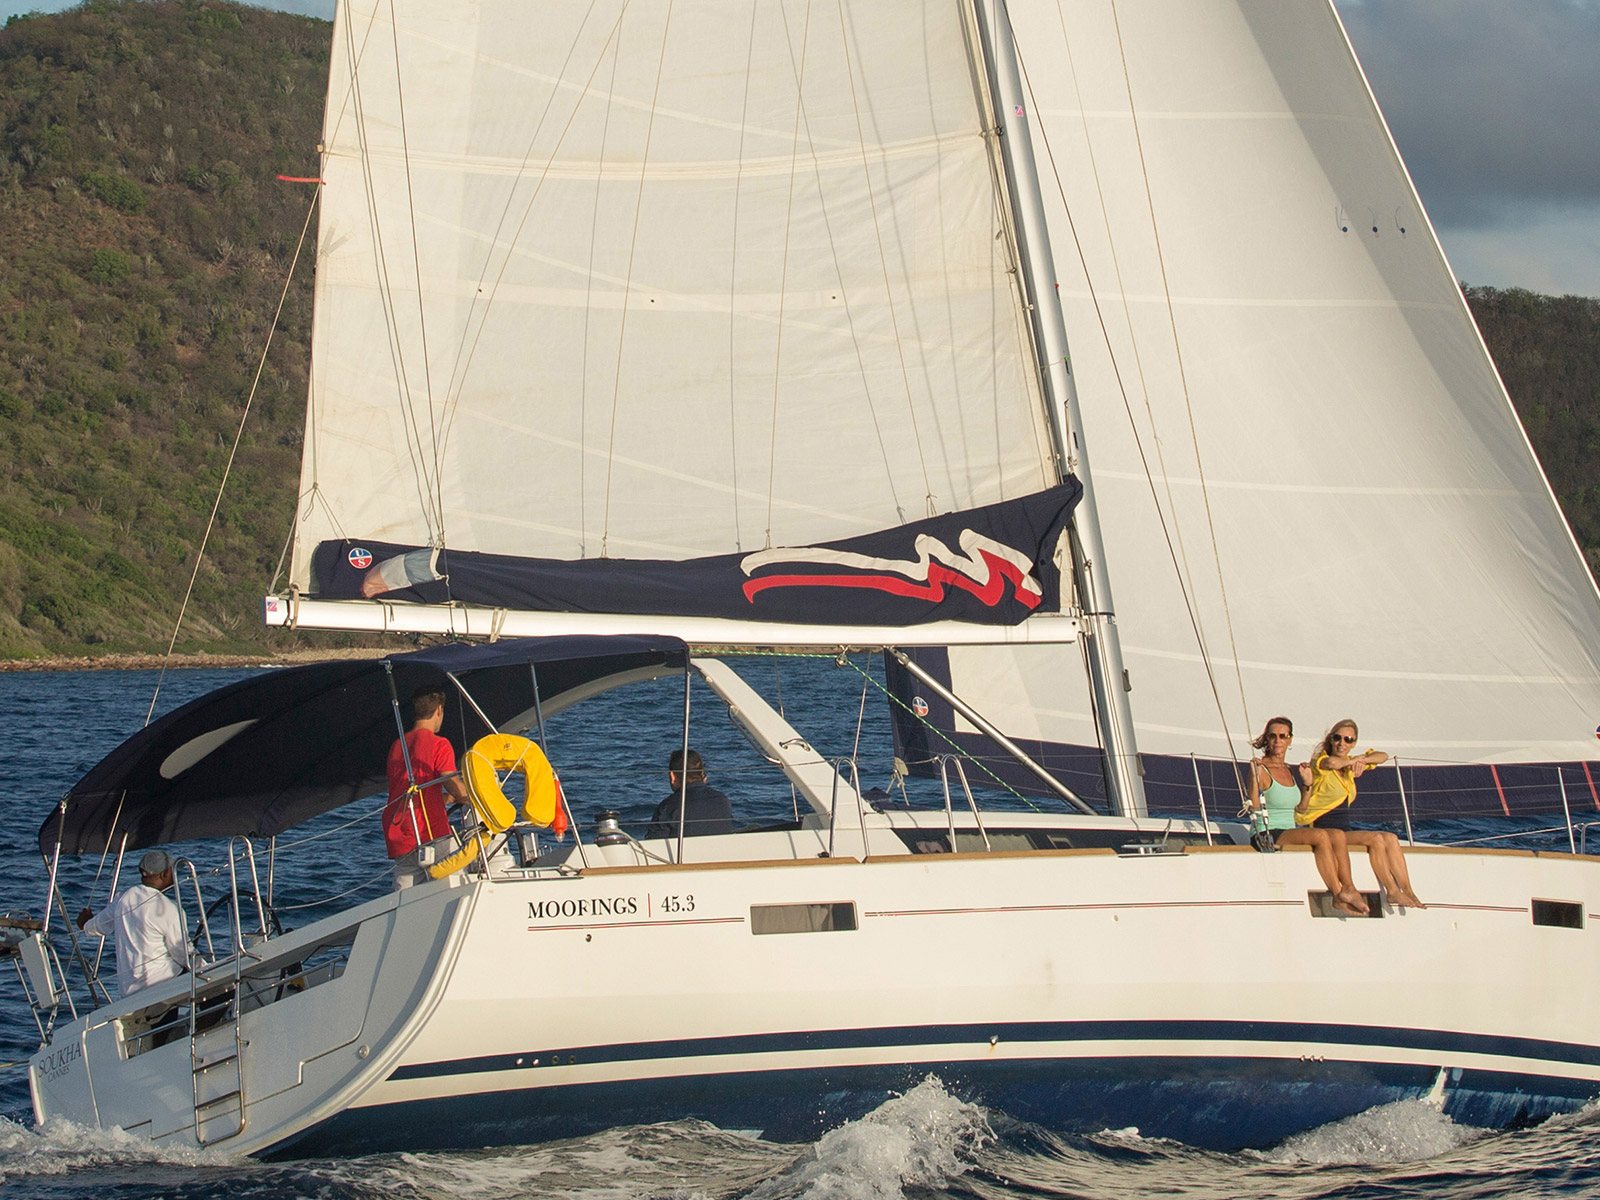 Oceanis 45 - Sailboat Charter Saint Lucia & Boat hire in St. Lucia Gros Islet Rodney Bay Marina 1